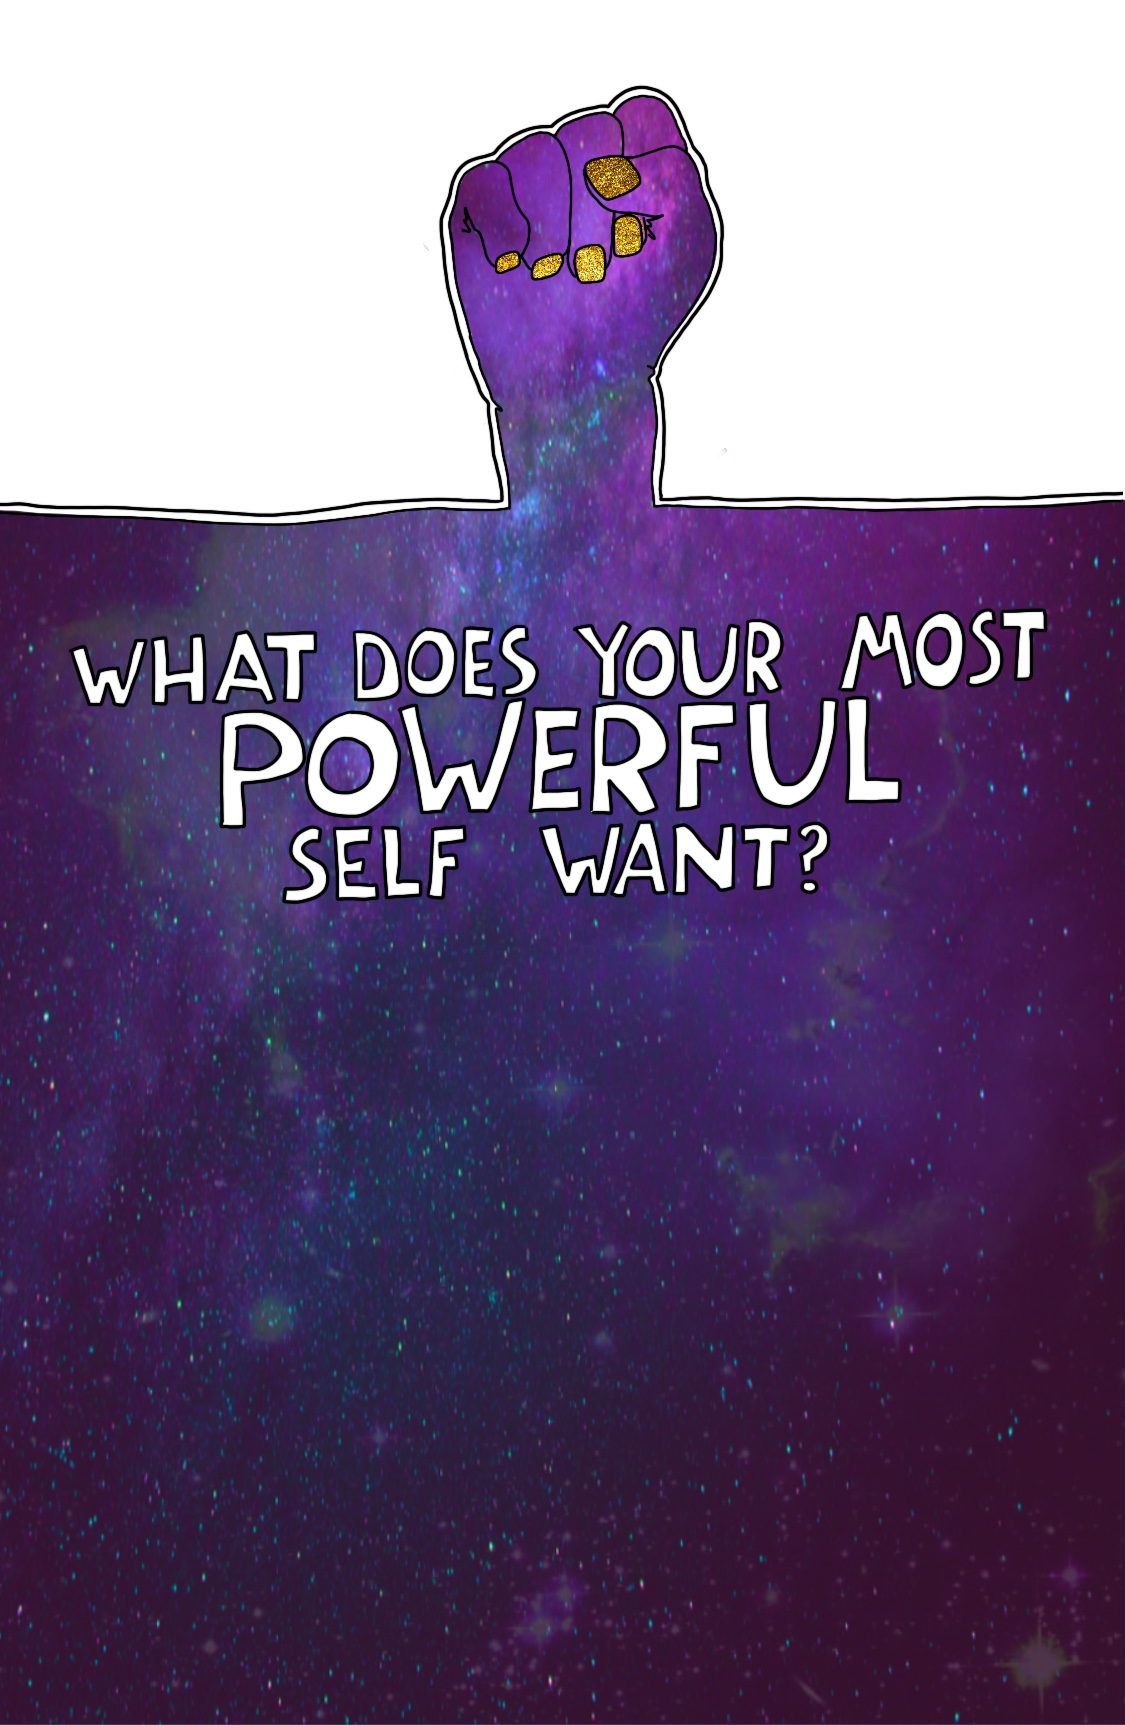 Journal Prompt: What does your most powerful self want?